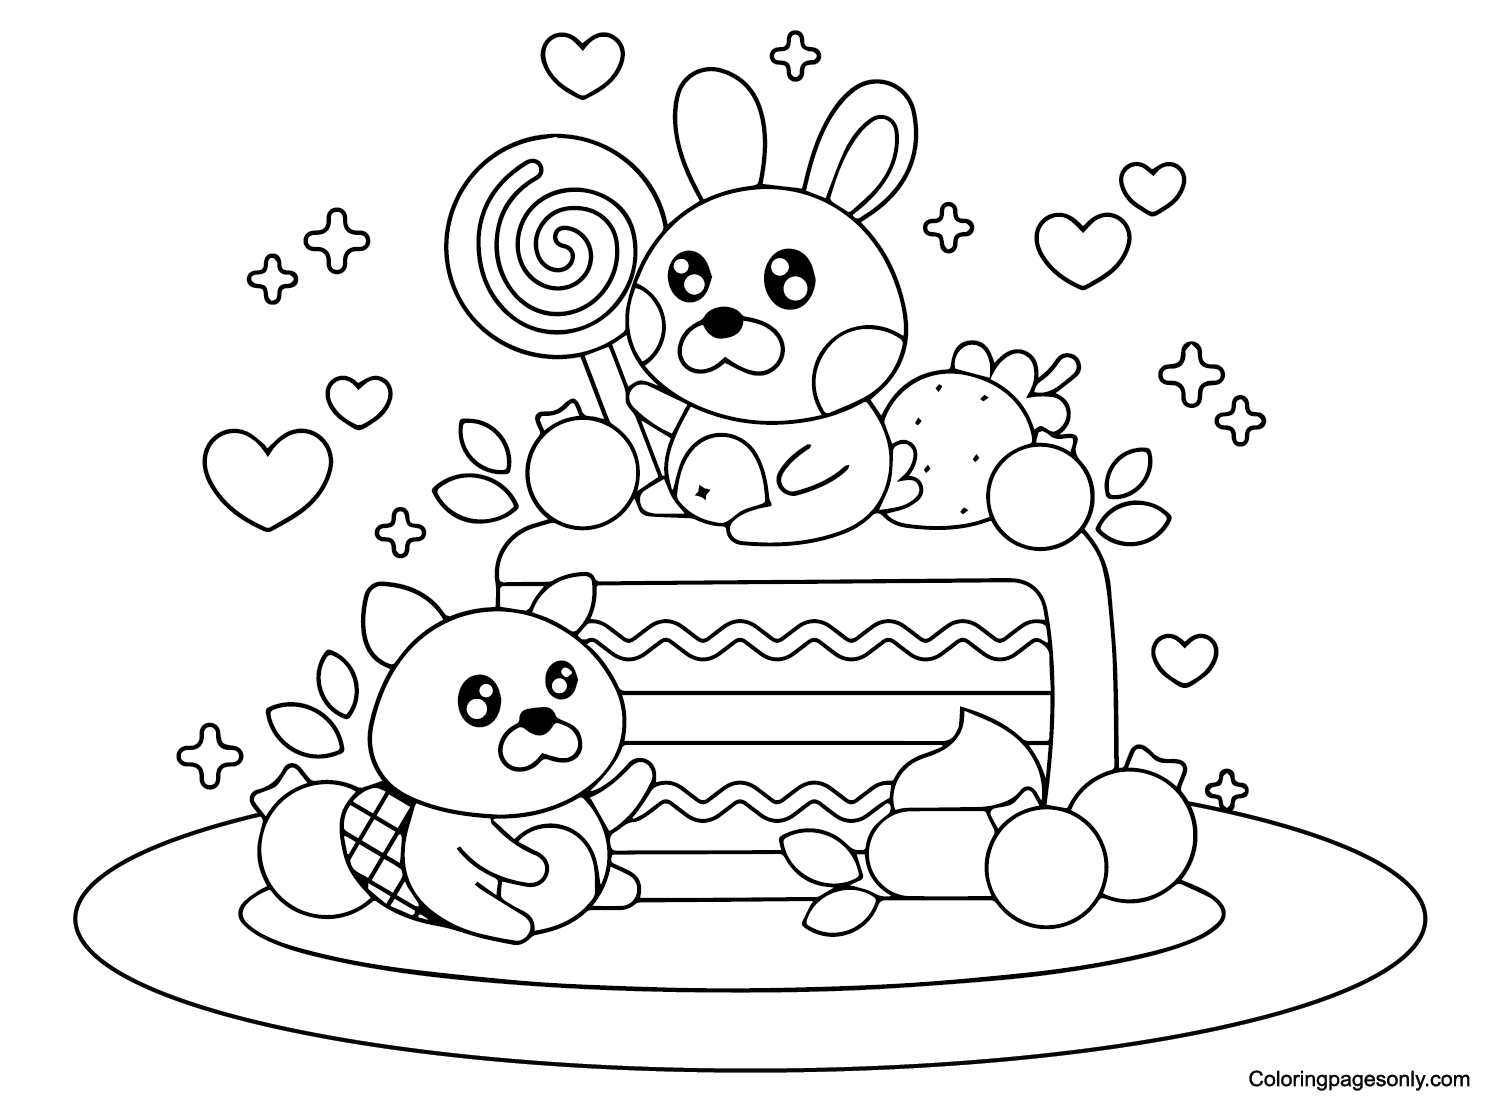 Candyland Cake Coloring Page